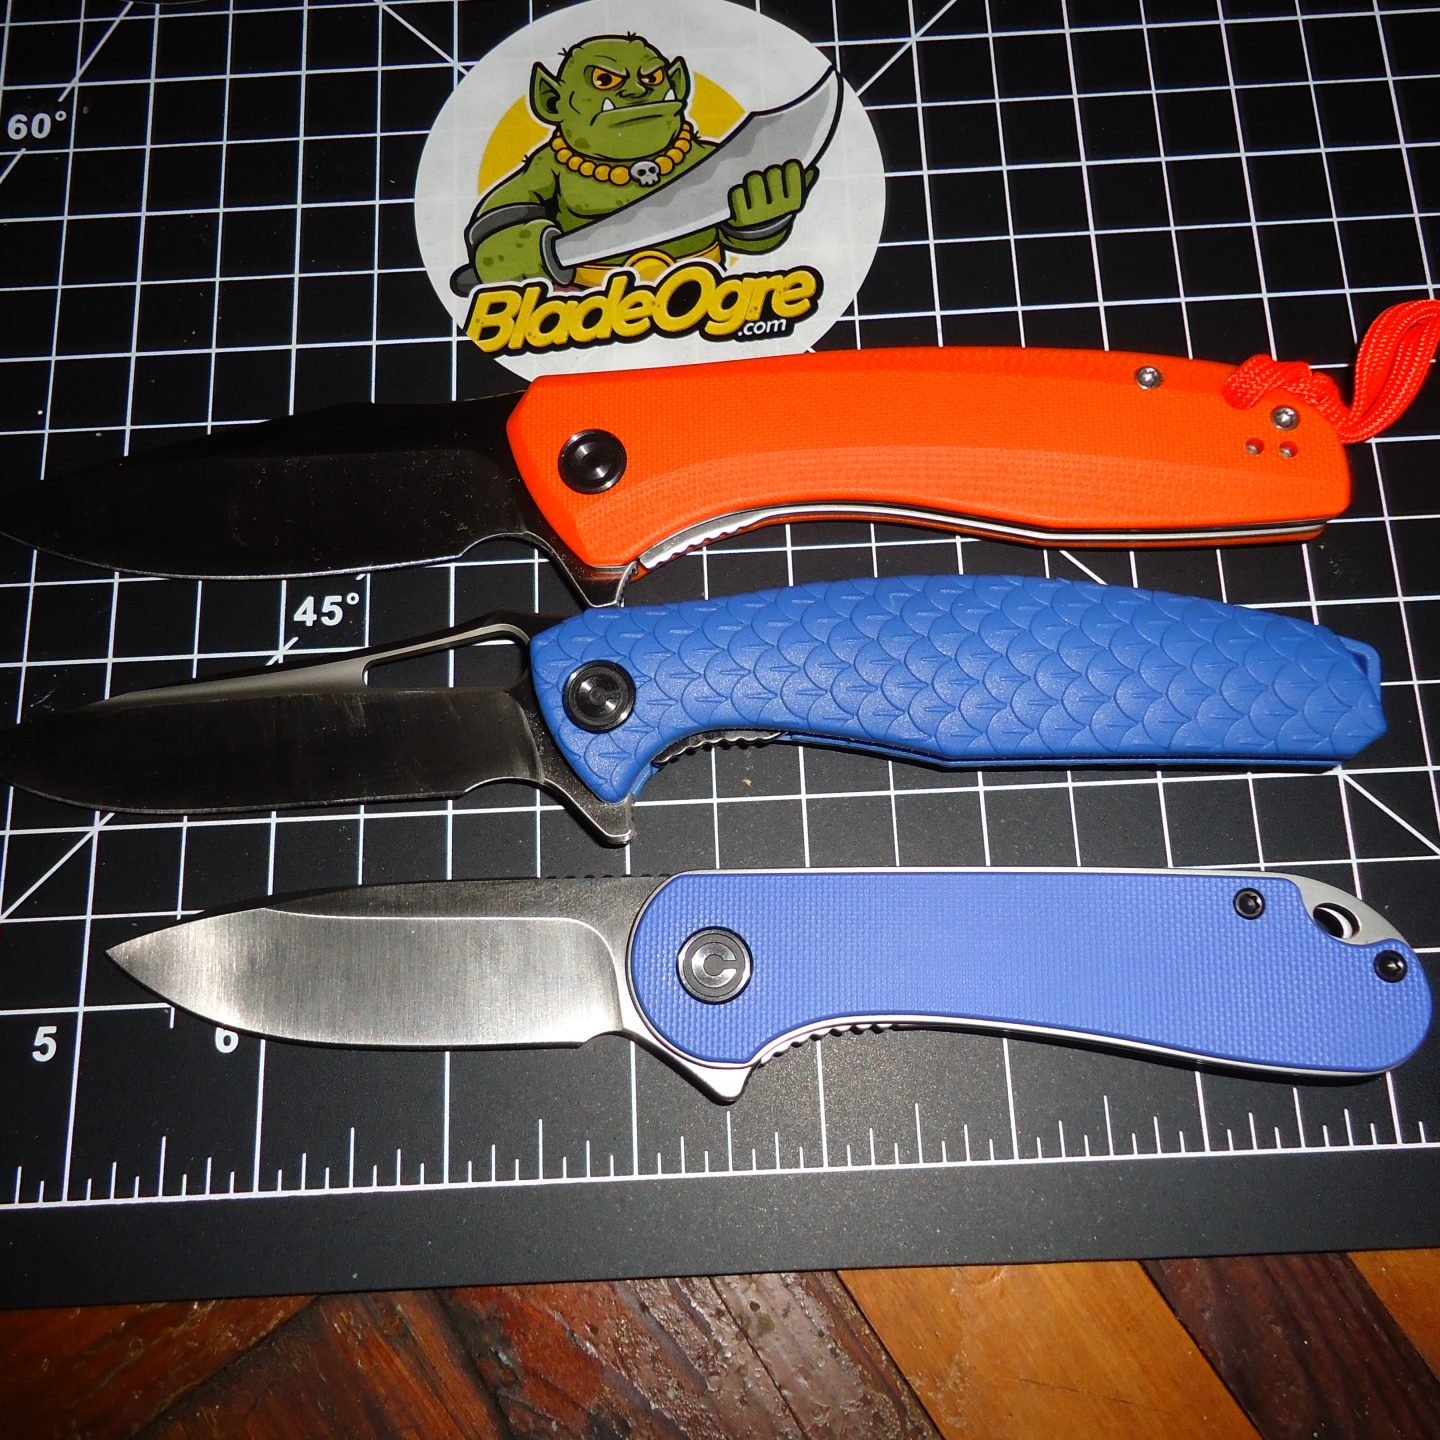 Civivi: The Current King of Budget EDC Knives?